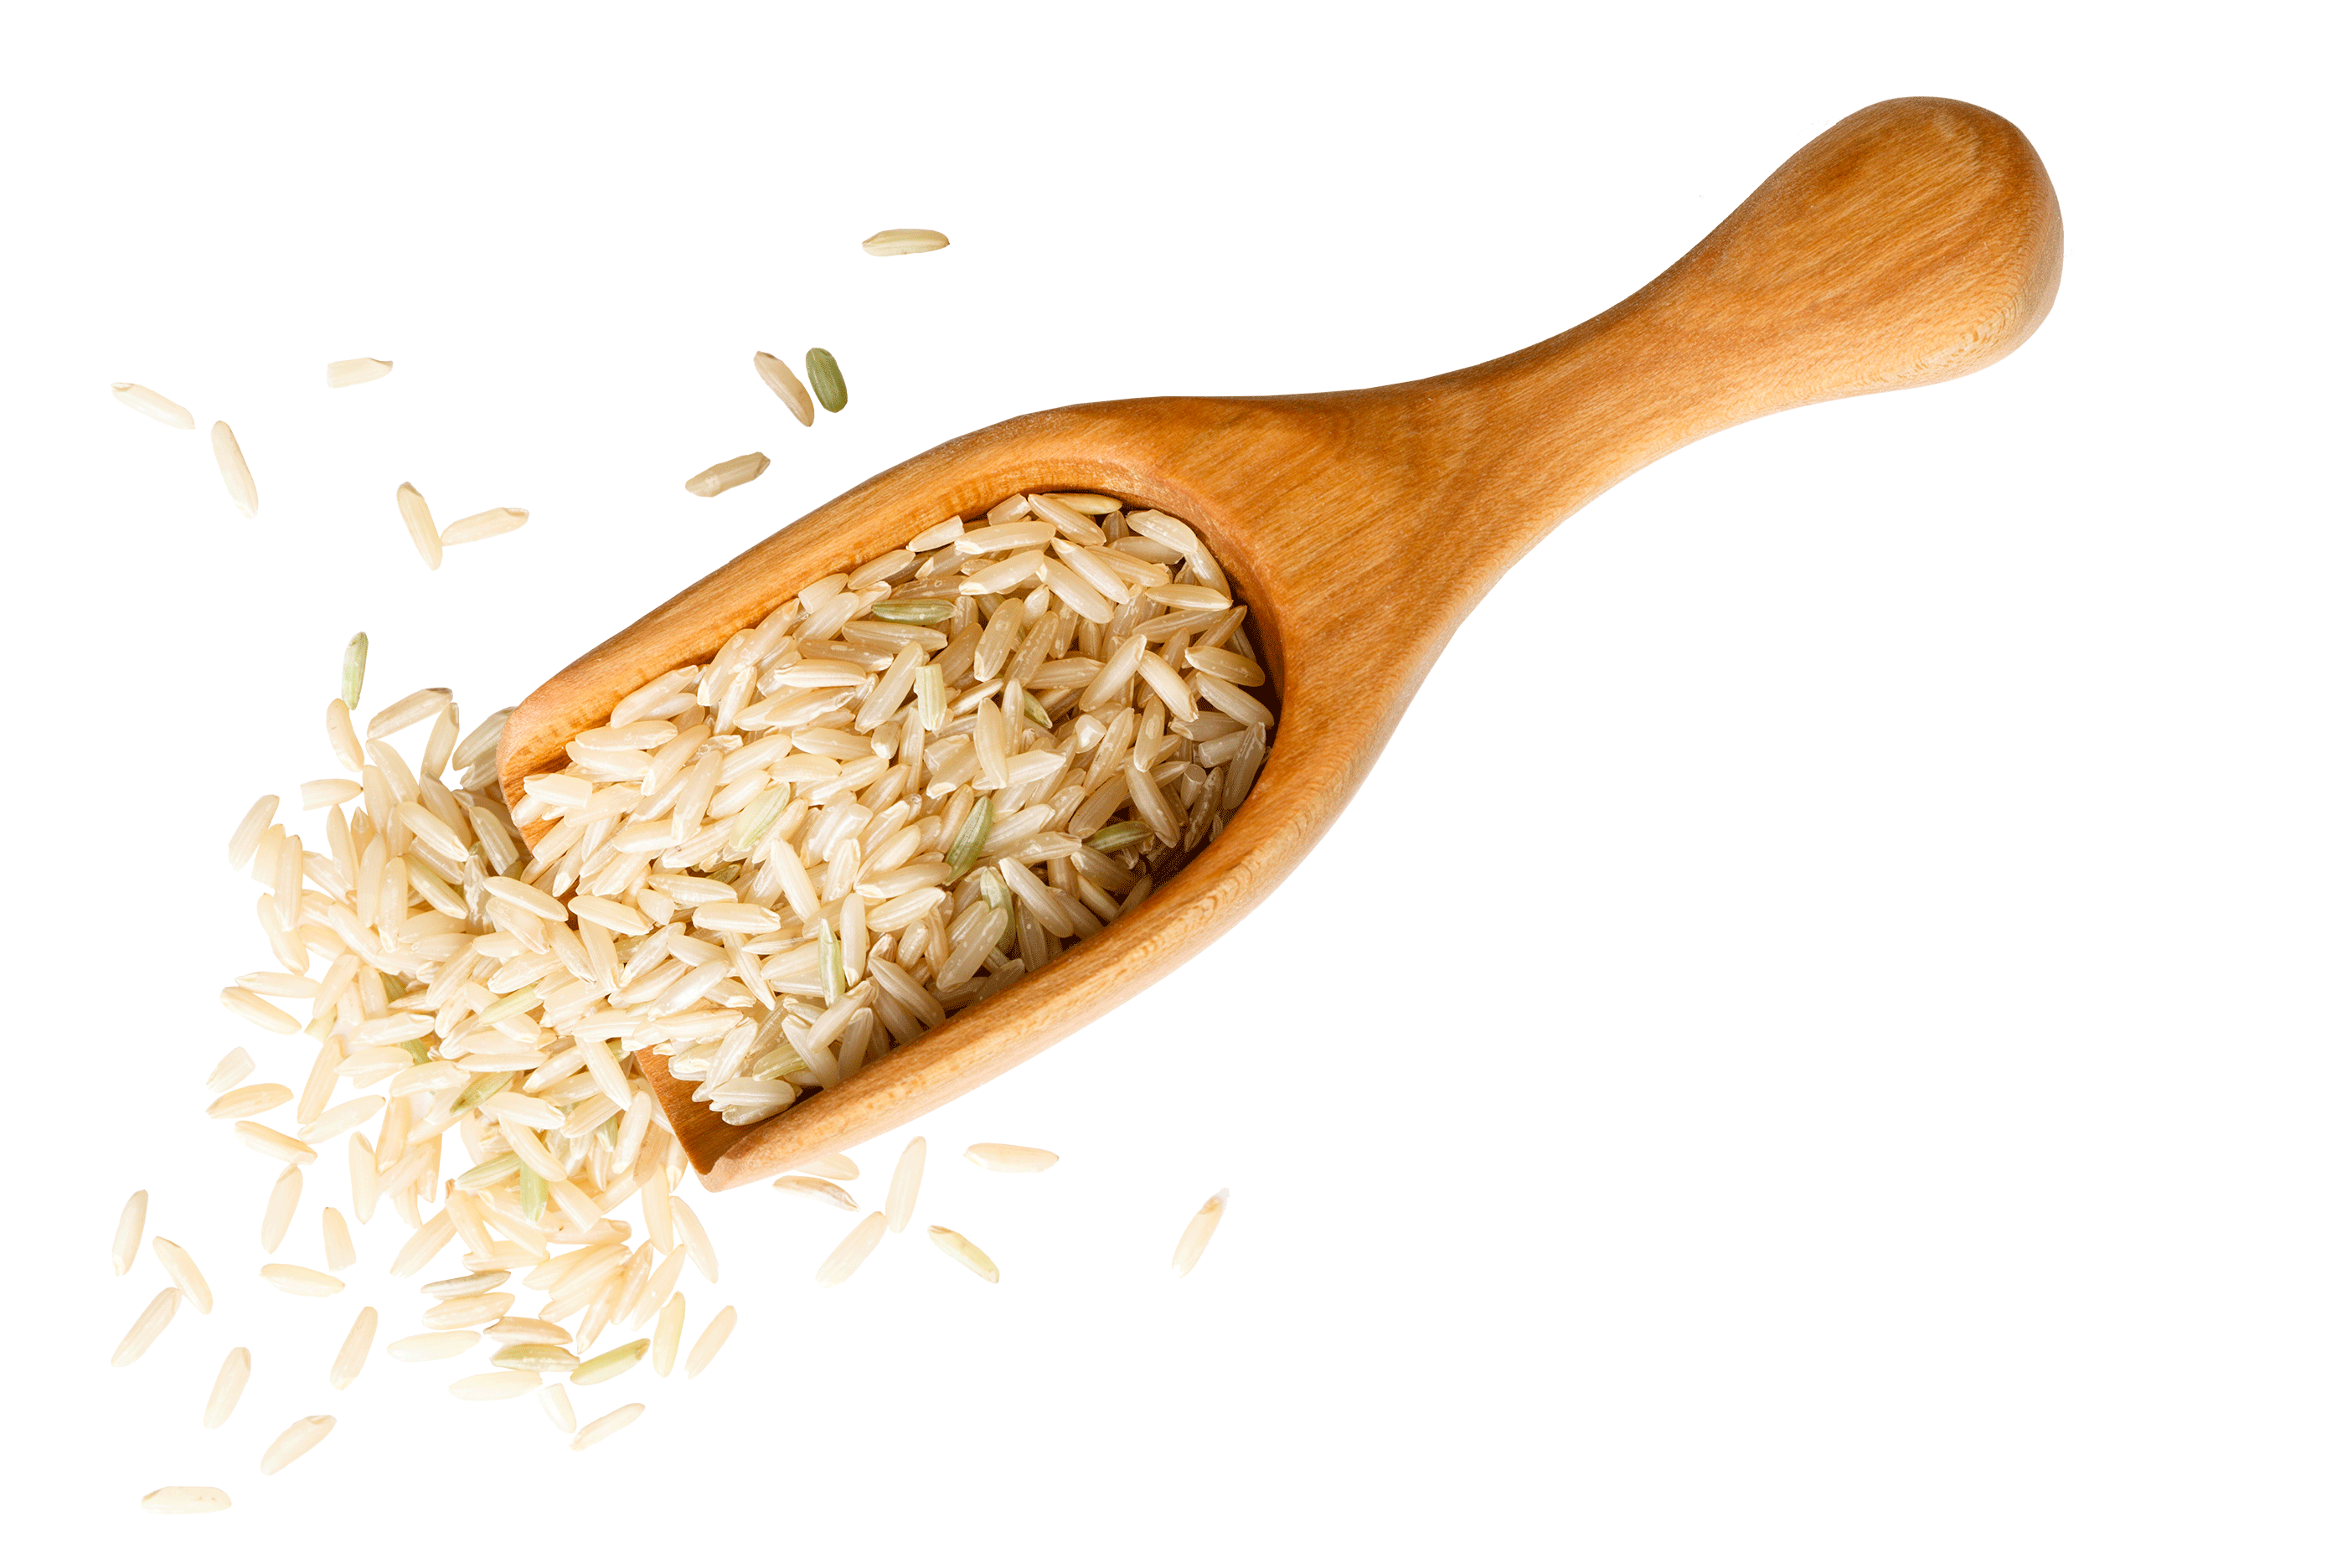 Wooden spoon with uncooked rice spilling off of it.